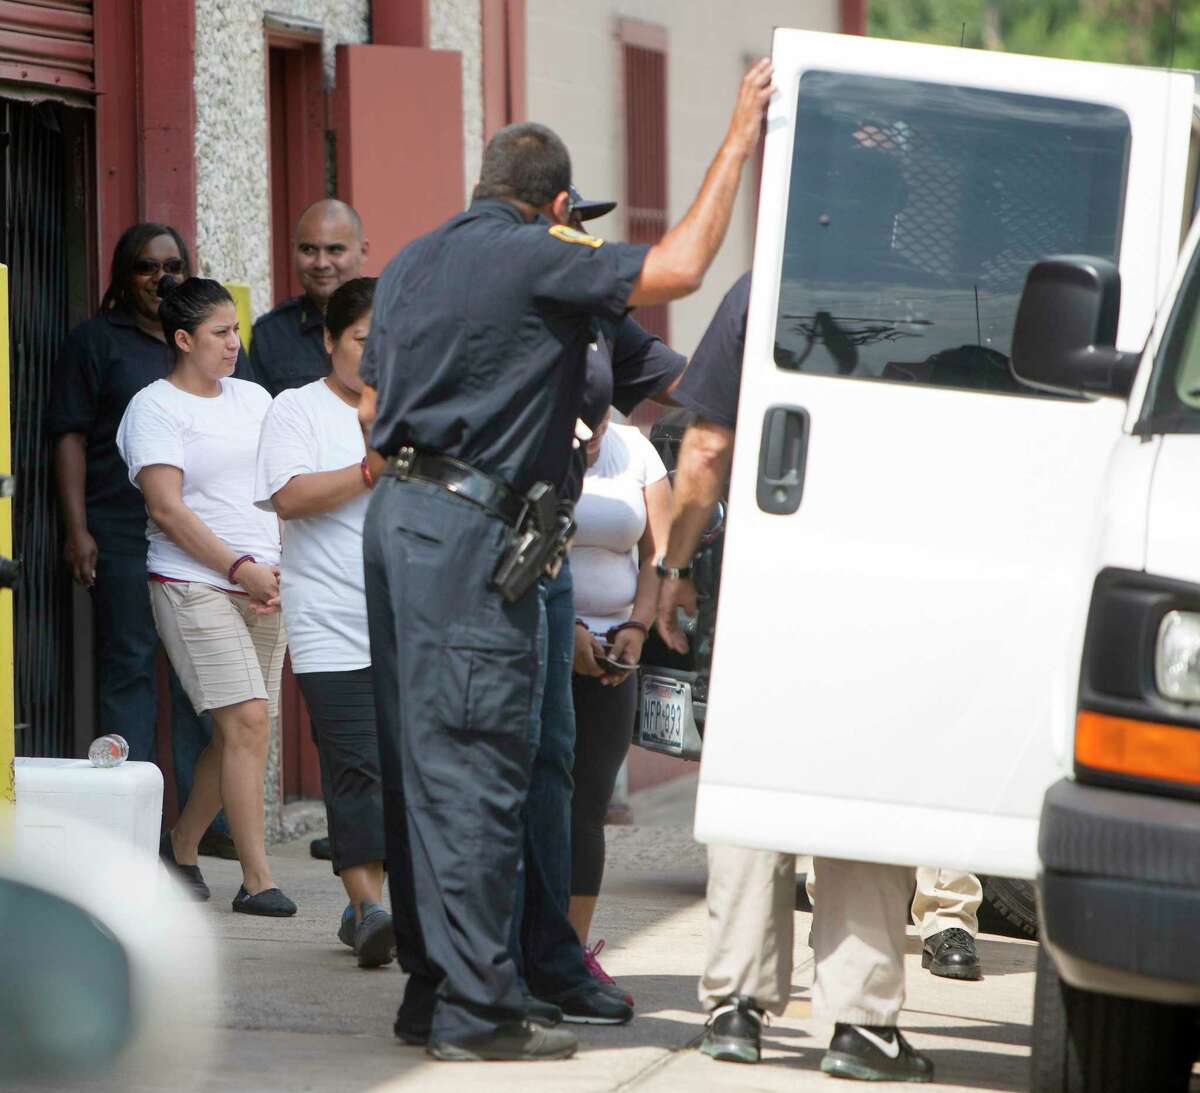 Federal agents raid a tortilla factory in the Heights, Tuesday, Aug. 4, 2015, in Houston. The raid began about 10 a.m. at La Espiga de Oro at 1200 15th Street near Shepherd. Eleven workers from the factory were detained at the scene.